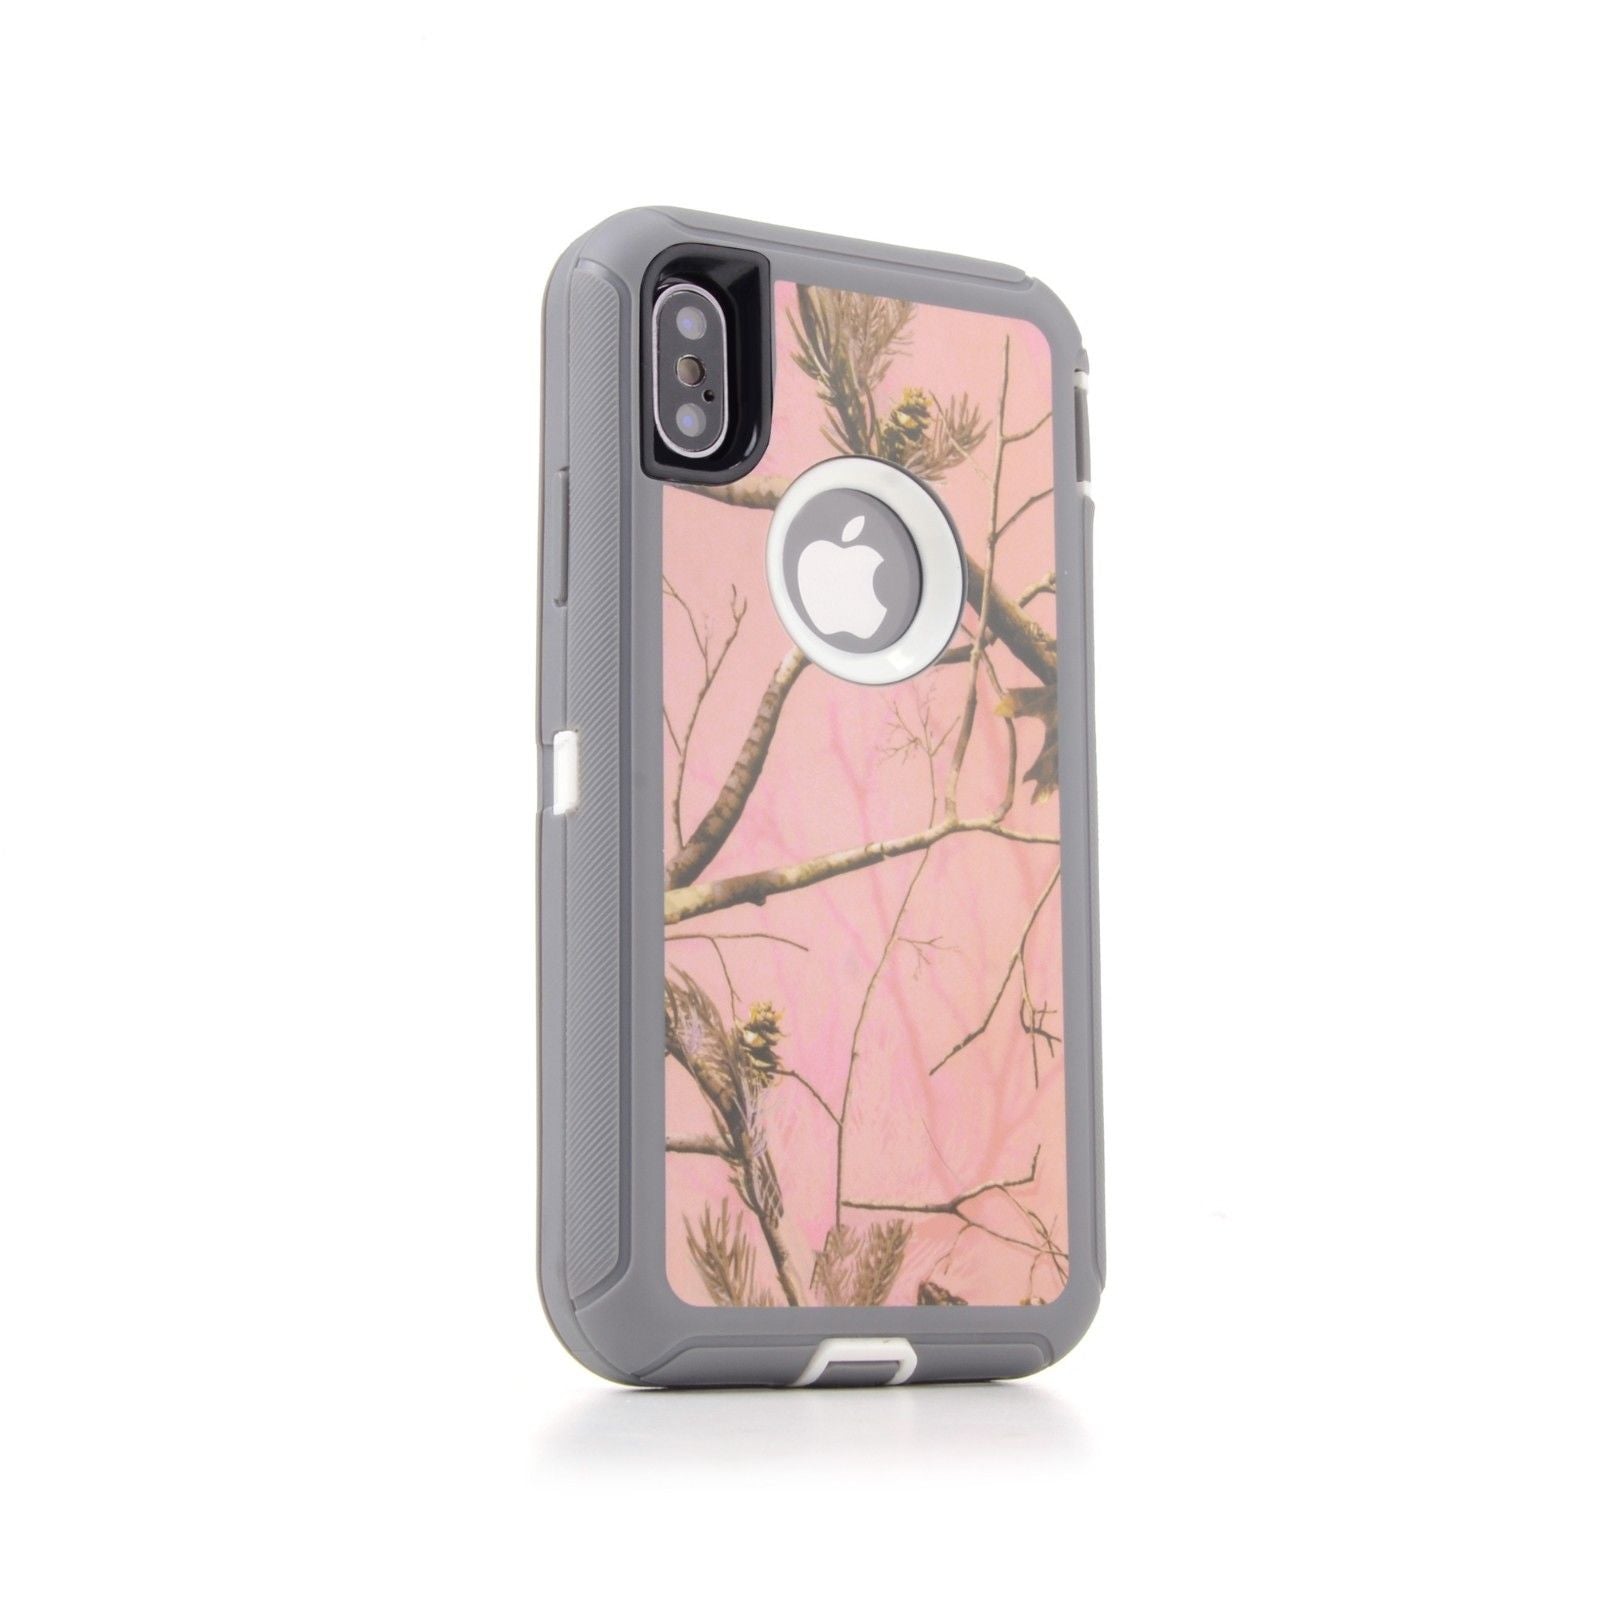 Case Hybrid Heavy Duty Shockproof Rubber For iPhone Se/6/Plus - carolay.co